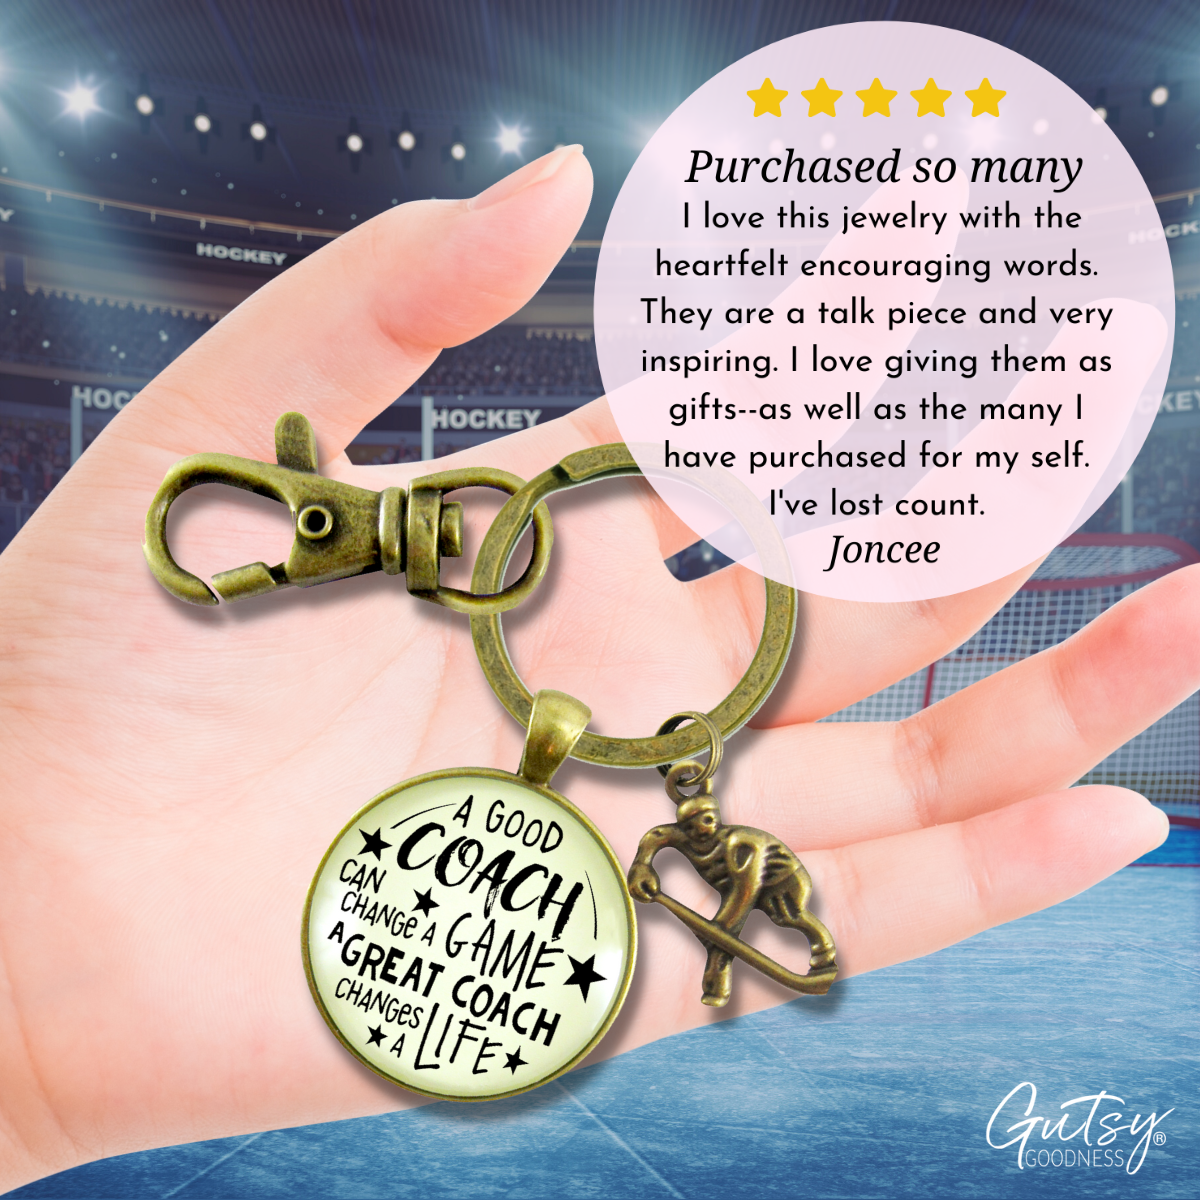 Hockey Coaching Sport Keychain Great Coach Changes Life Thank You Gift - Gutsy Goodness Handmade Jewelry;Hockey Coaching Sport Keychain Great Coach Changes Life Thank You Gift - Gutsy Goodness Handmade Jewelry Gifts